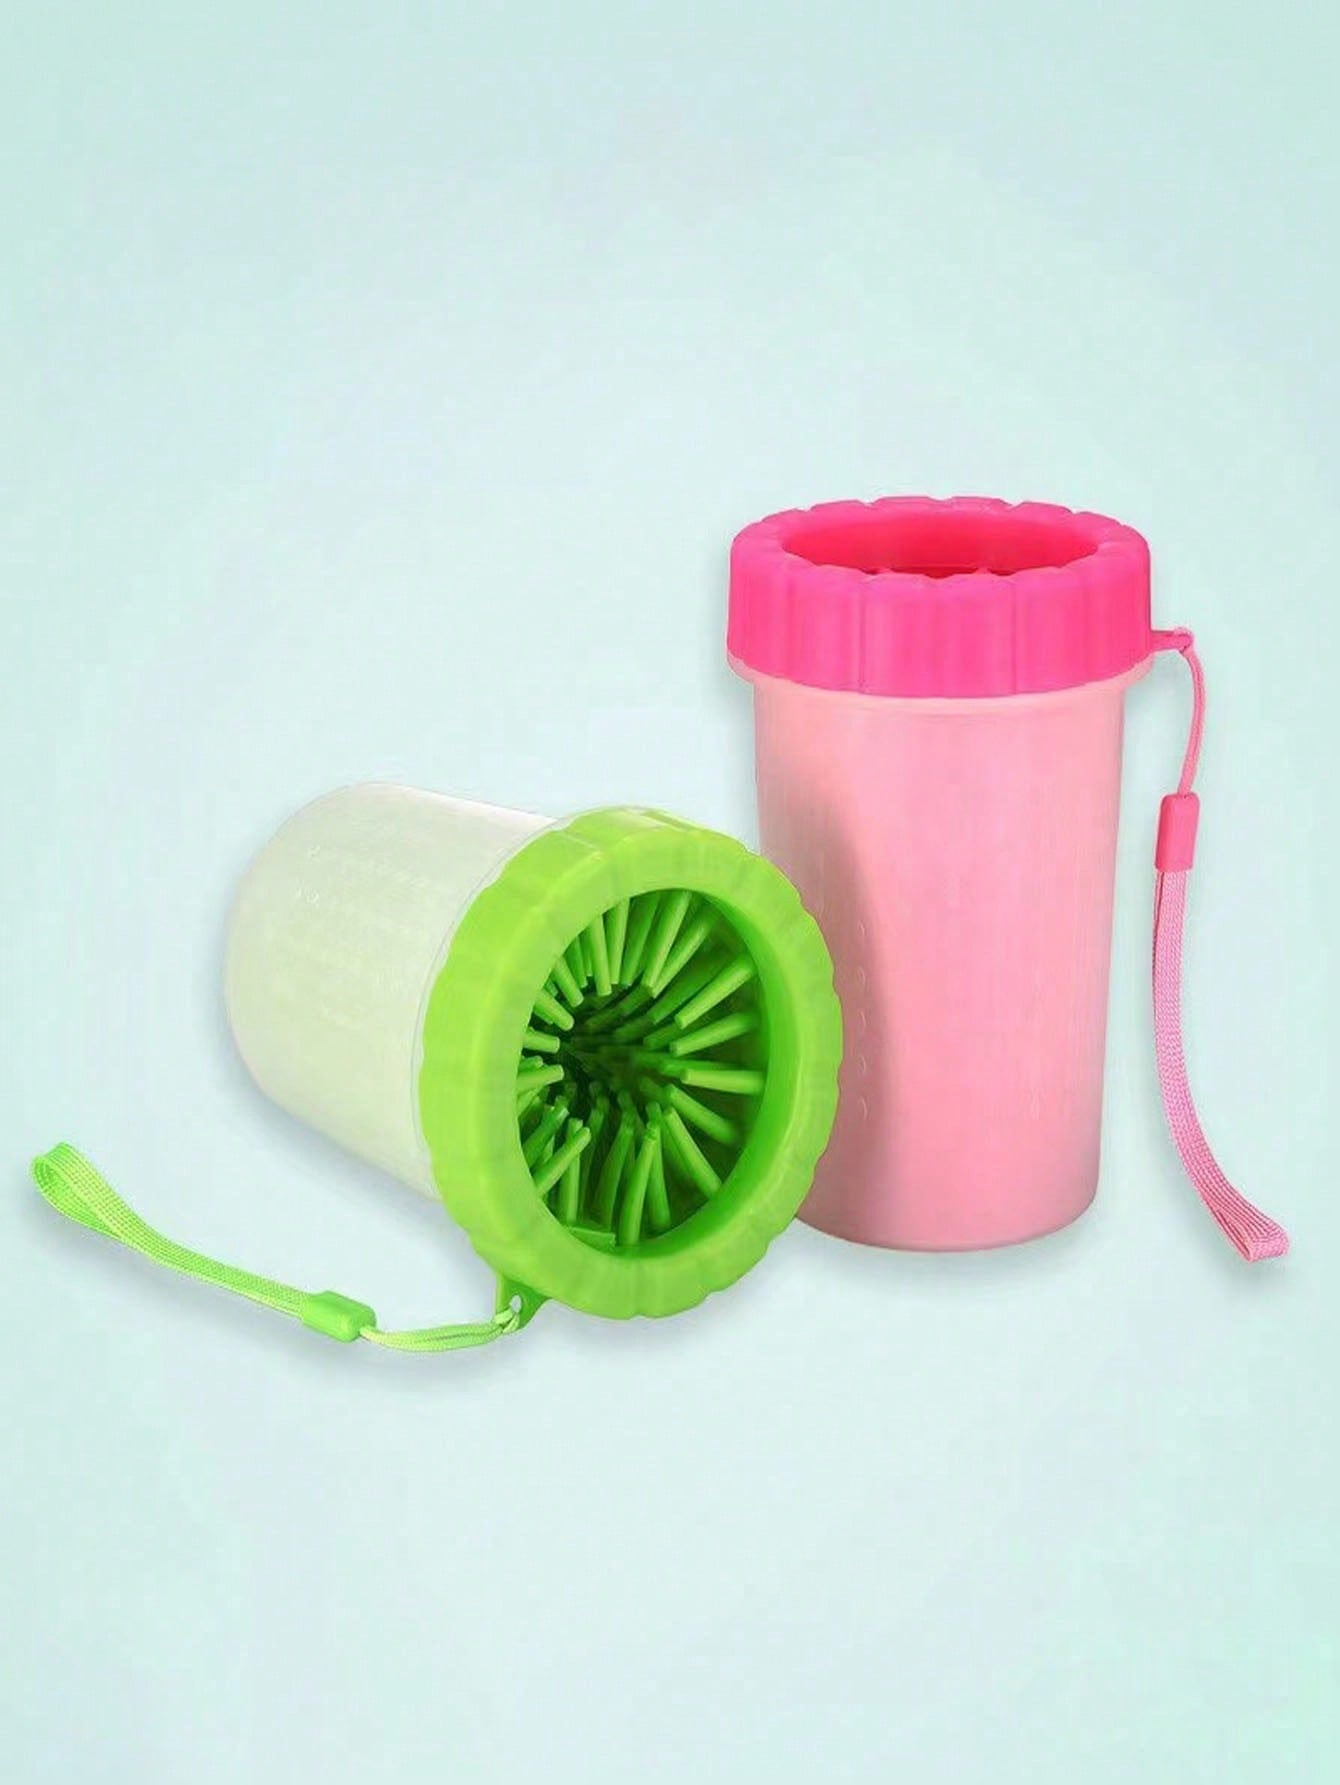 Pet Cleaning No-rinse Foot Washing Cup